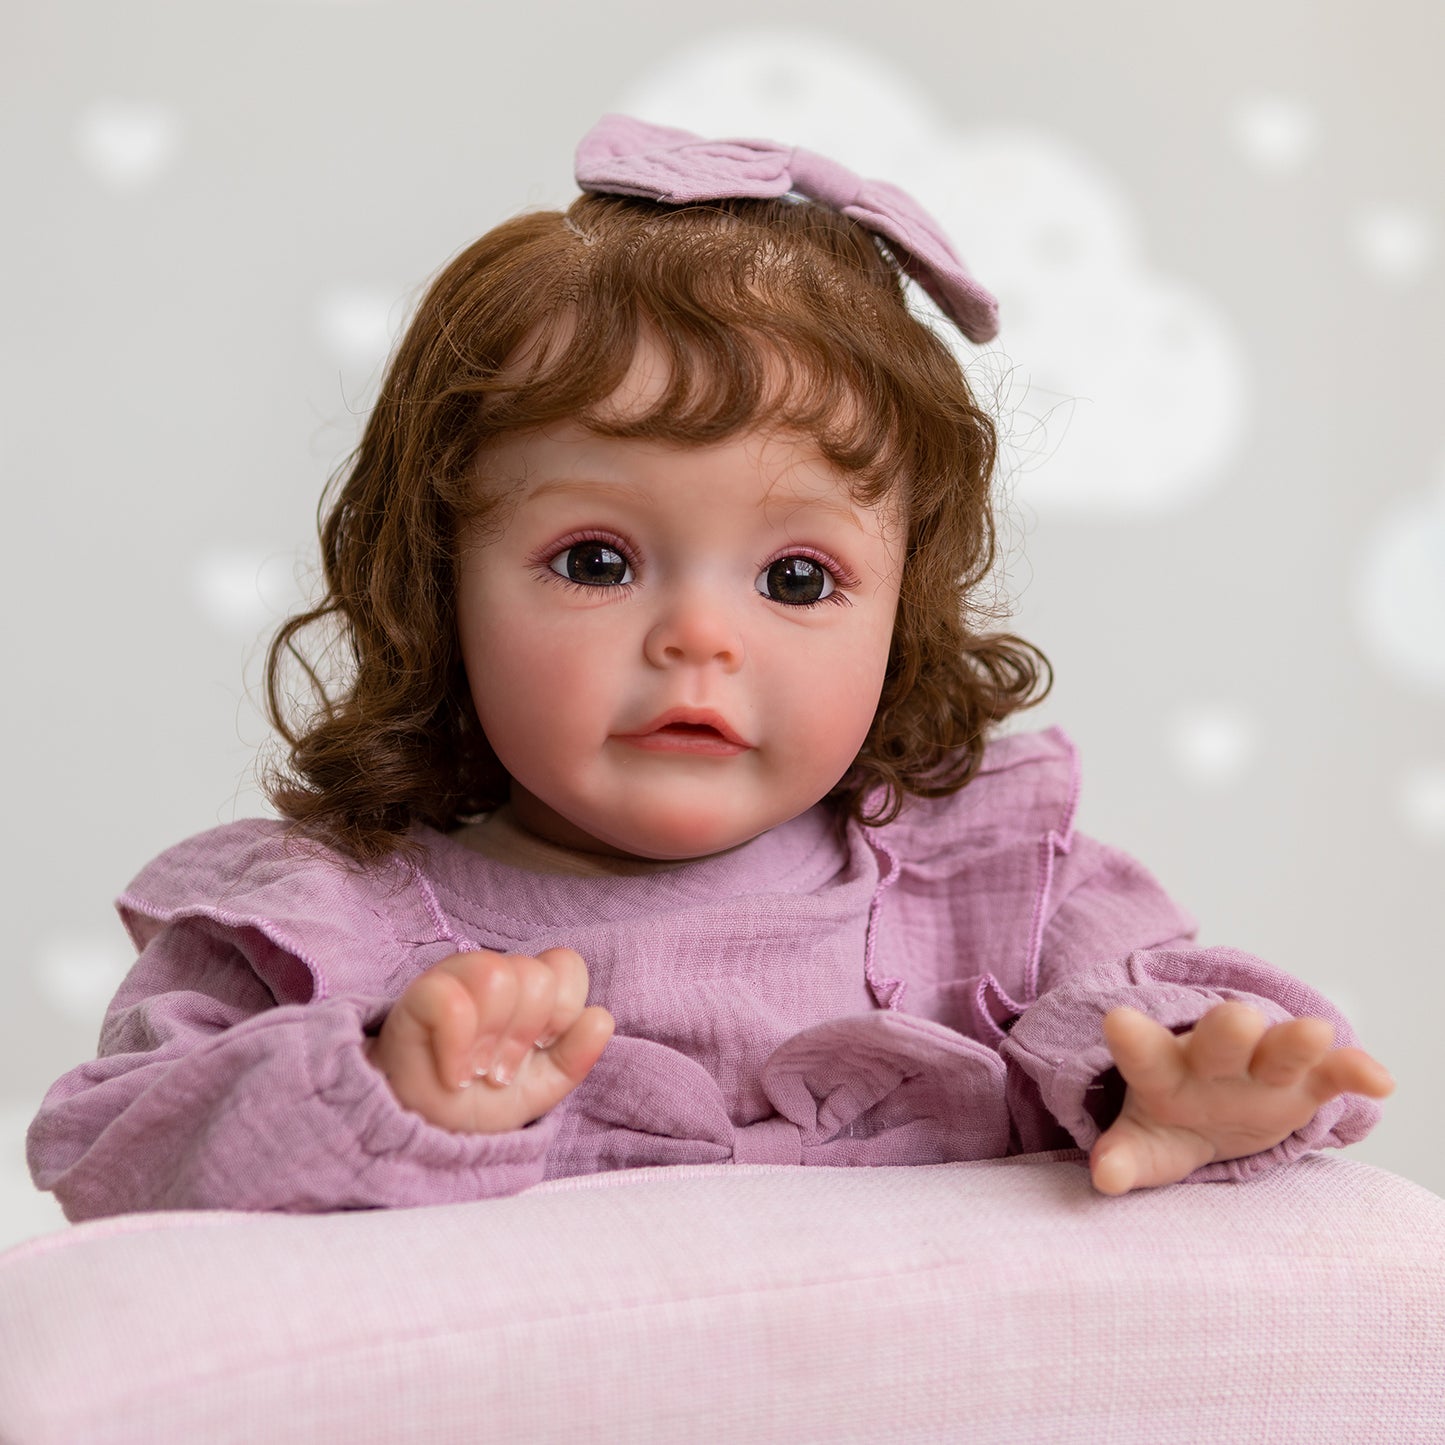 60 cm Lifelike baby dolls | reborn baby dolls | Realistic baby dolls| newborn baby dolls | real life baby dolls | rebron baby dolls toddler | lifelike toddler dolls | therapy dolls for adults | anatomically correct baby girl doll | infant baby doll | gift for kids ages 3+ girl | dementia patients | weighted cloth body | birthday gift | collection | girl | boys |  mother | daughter | granddaughter | sleeping |real look real baby dolls that look real looking | Mothers day | reborn toddler dolls | mnmj